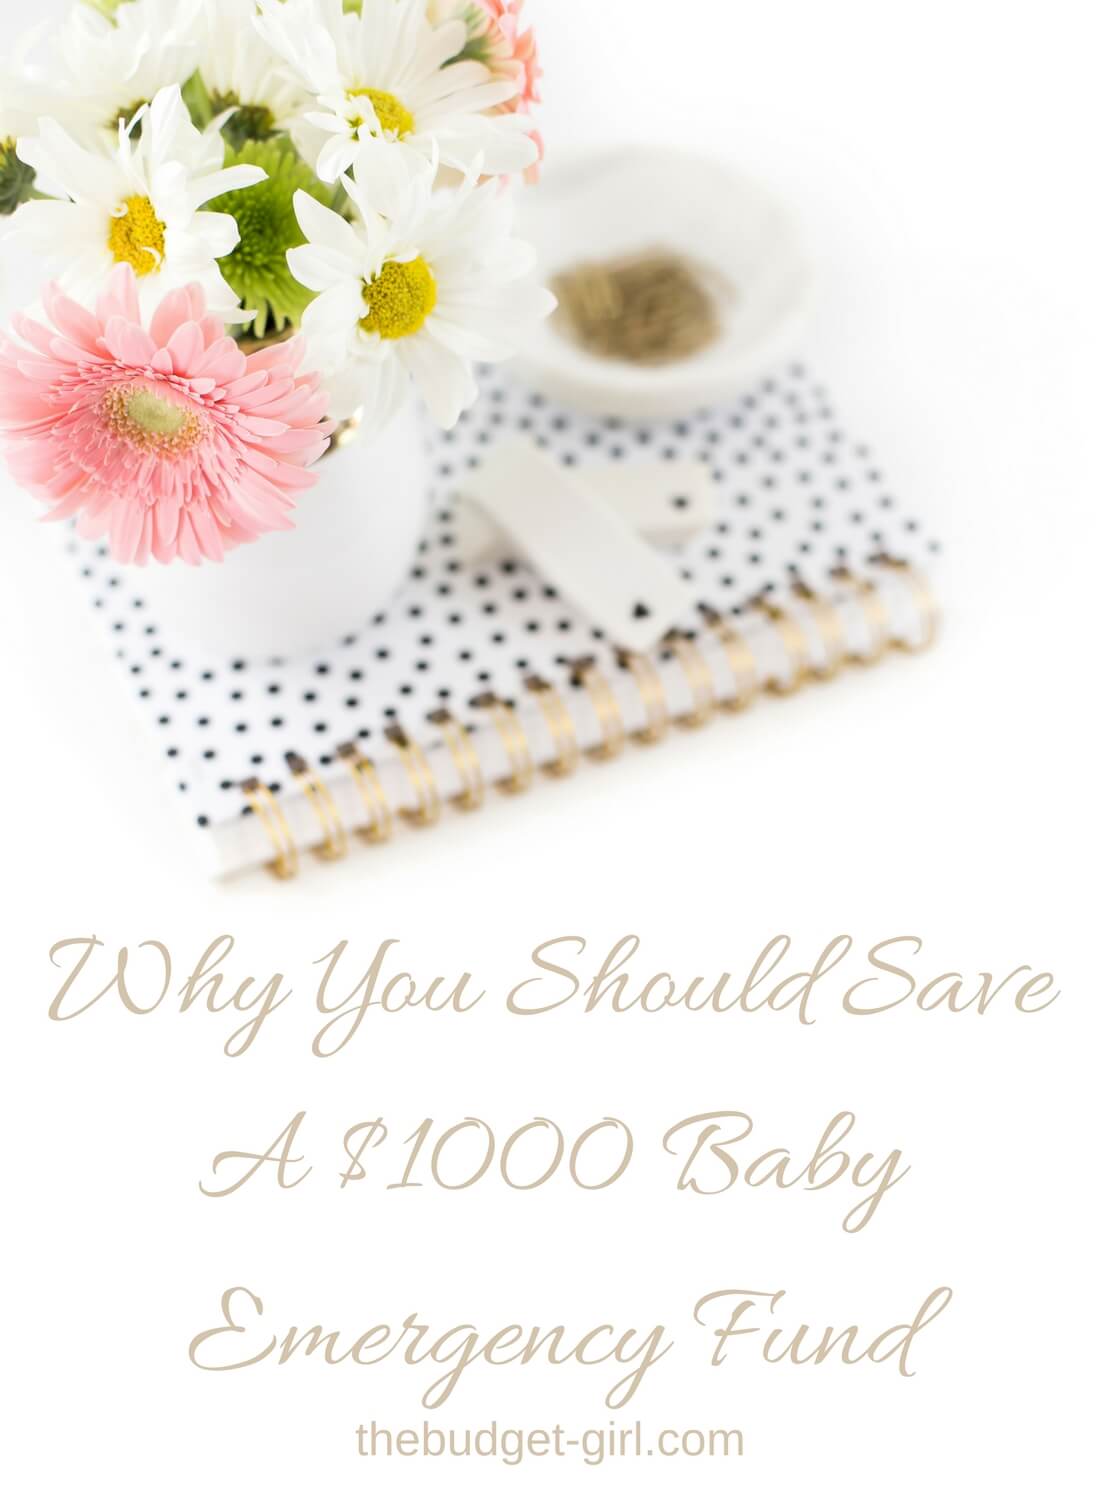 Why You Should Save A $1000 Baby Emergency Fund